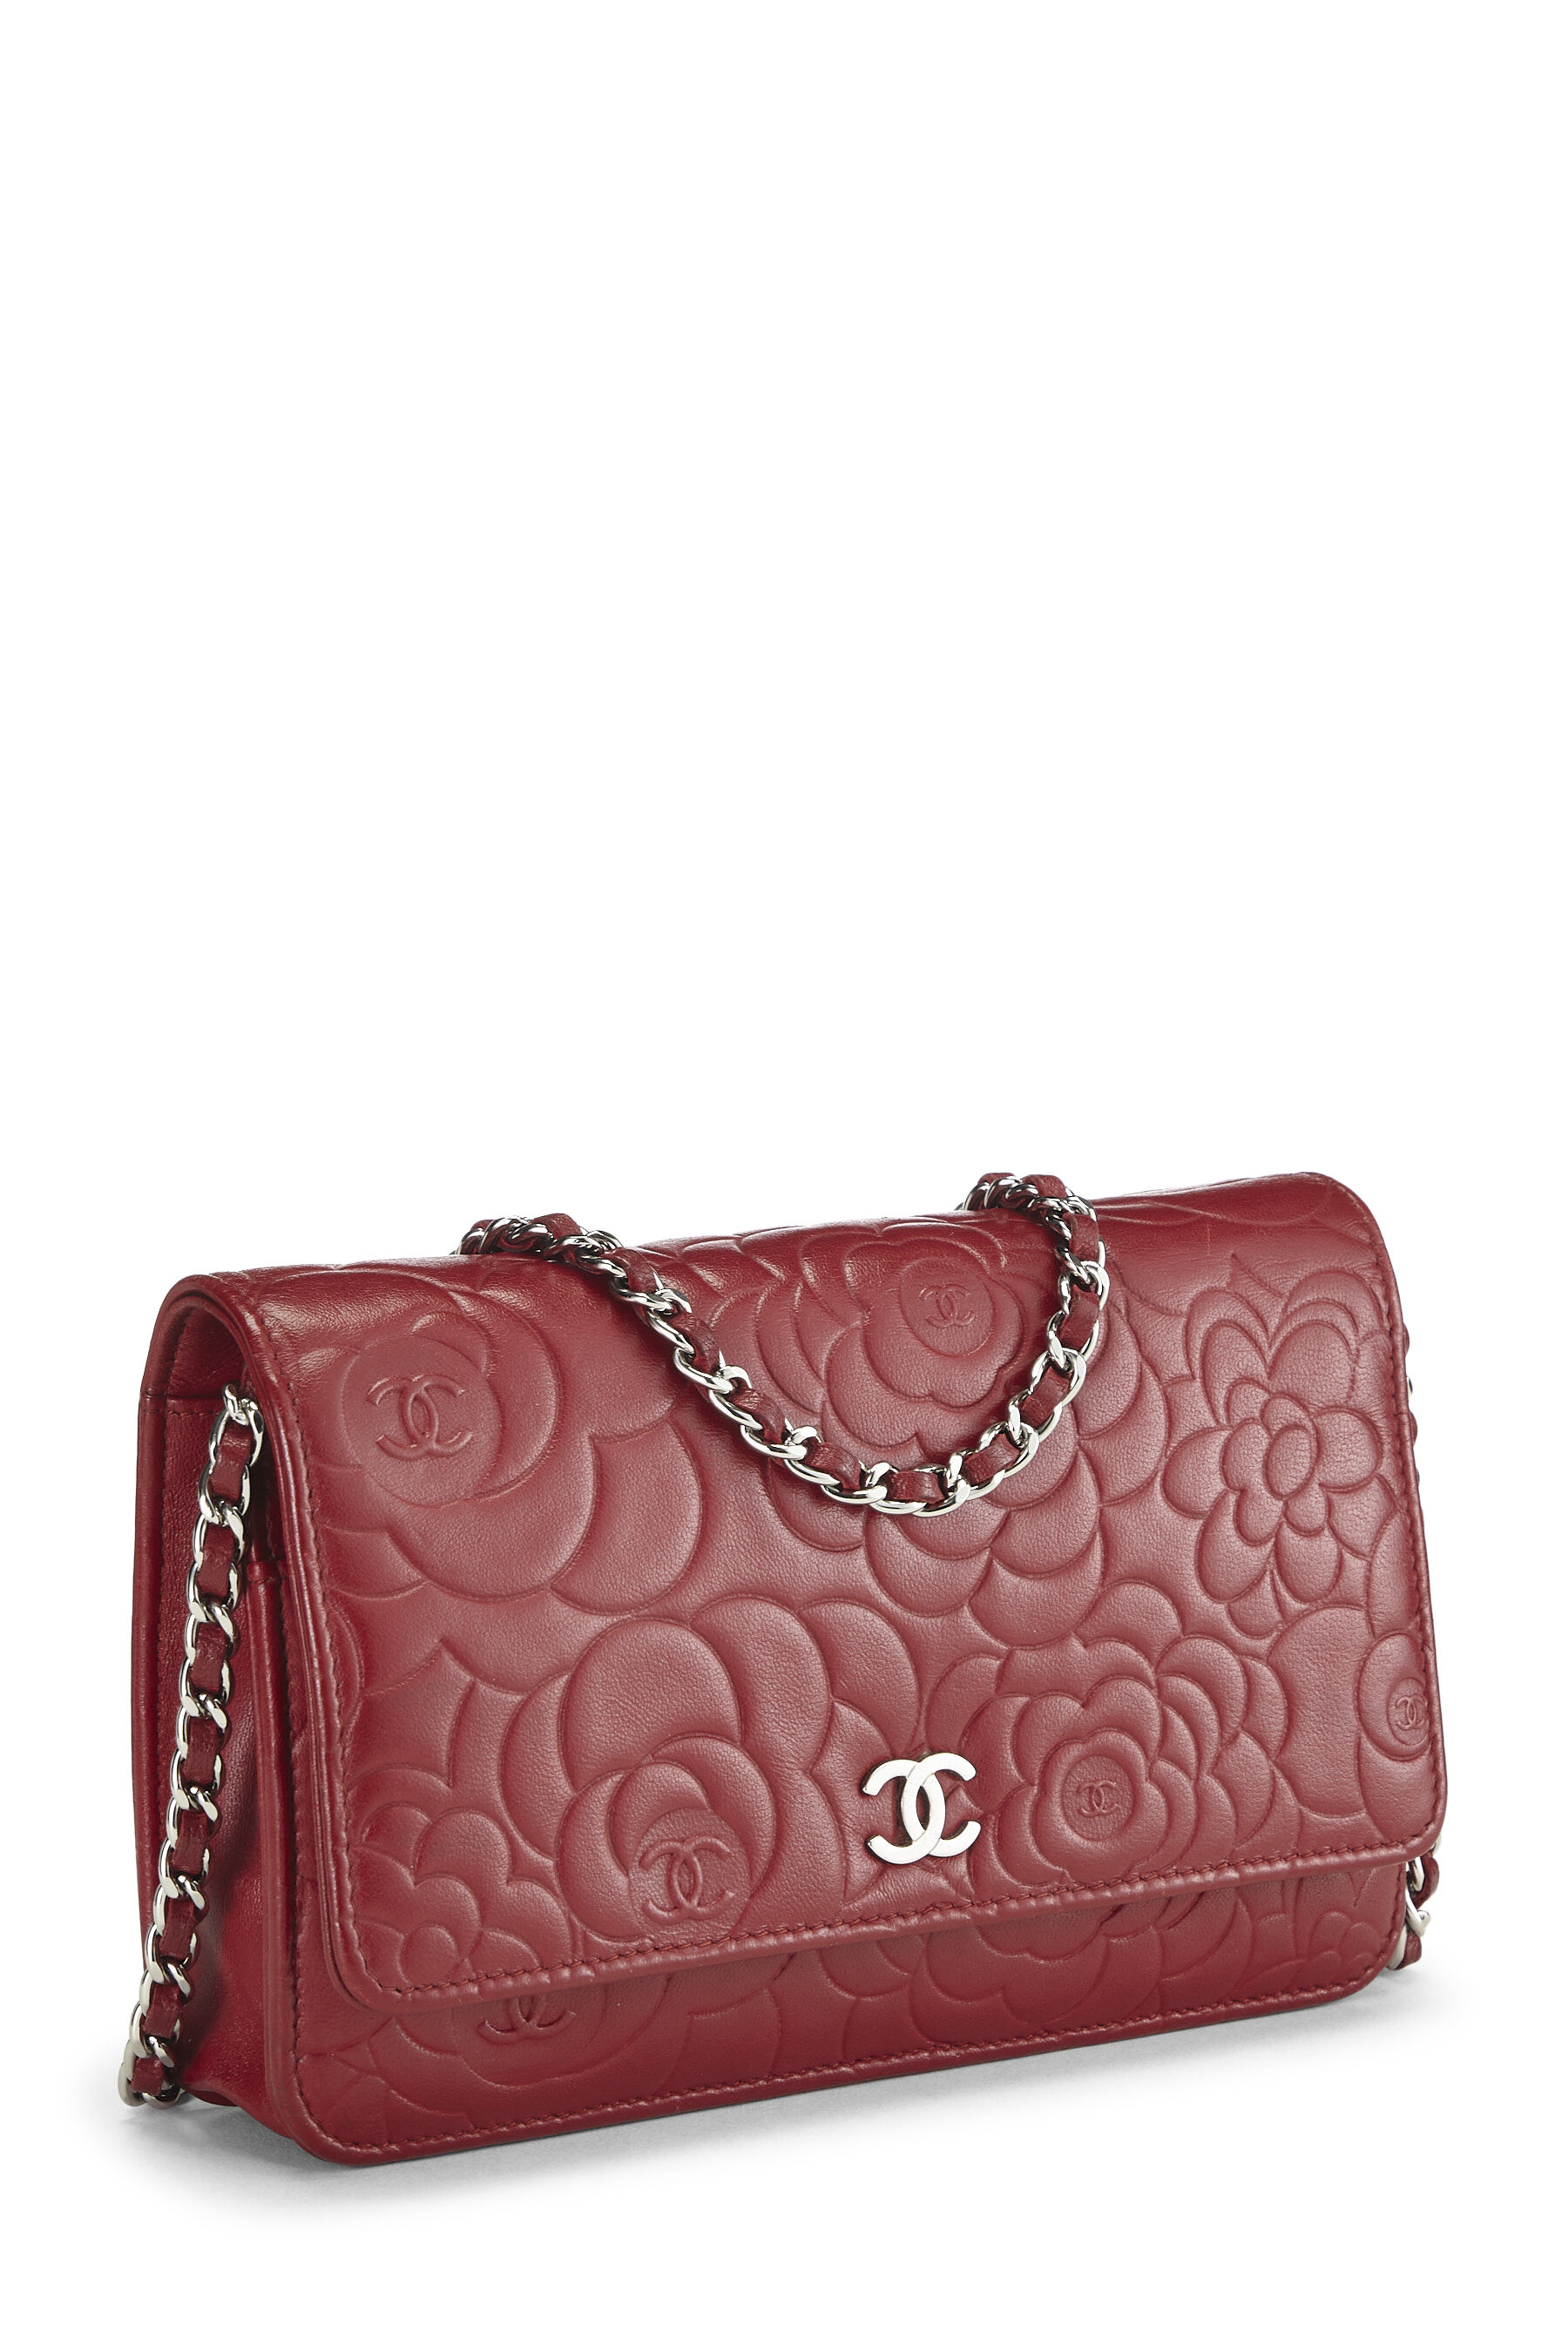 Chanel Red Lambskin Camellia Wallet on Chain (WOC